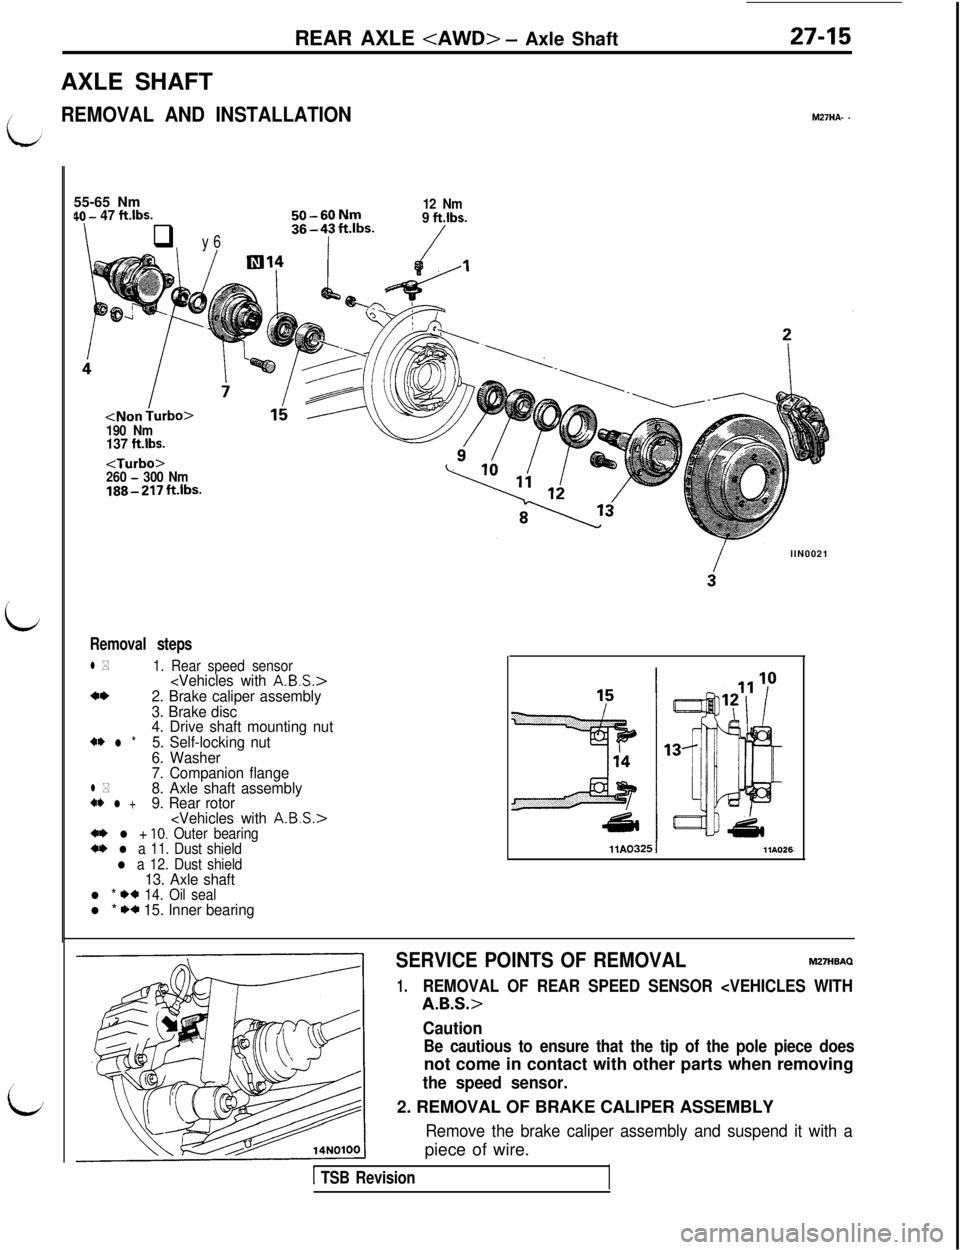 MITSUBISHI 3000GT 1991  Service Manual I’REAR AXLE 
<AWD> - Axle Shaft
AXLE SHAFT
REMOVAL AND INSTALLATION27-15M27HA- -
i
/
i55-65 Nm
QO - 47 ftlbs.
Iq y 6
50-60Nm
36-4?R.‘bs-
12 Nm9 ft.lbs.
/
190 Nm137 ft.lbs.<Turbo>
260 - 300 Nm188-2